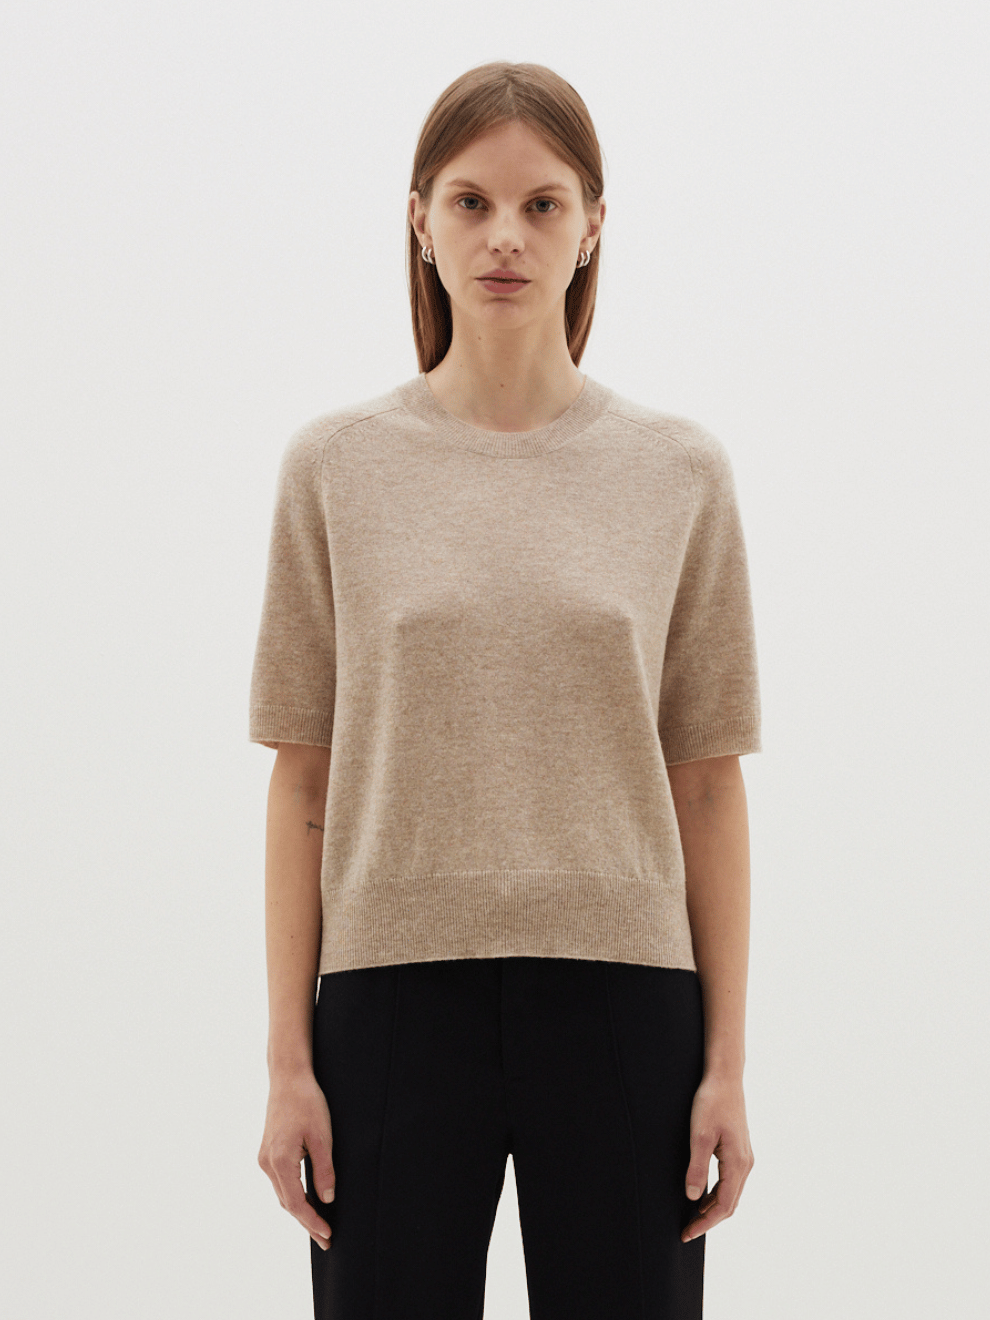 Wool Cashmere T-Shirt Knit in Tan